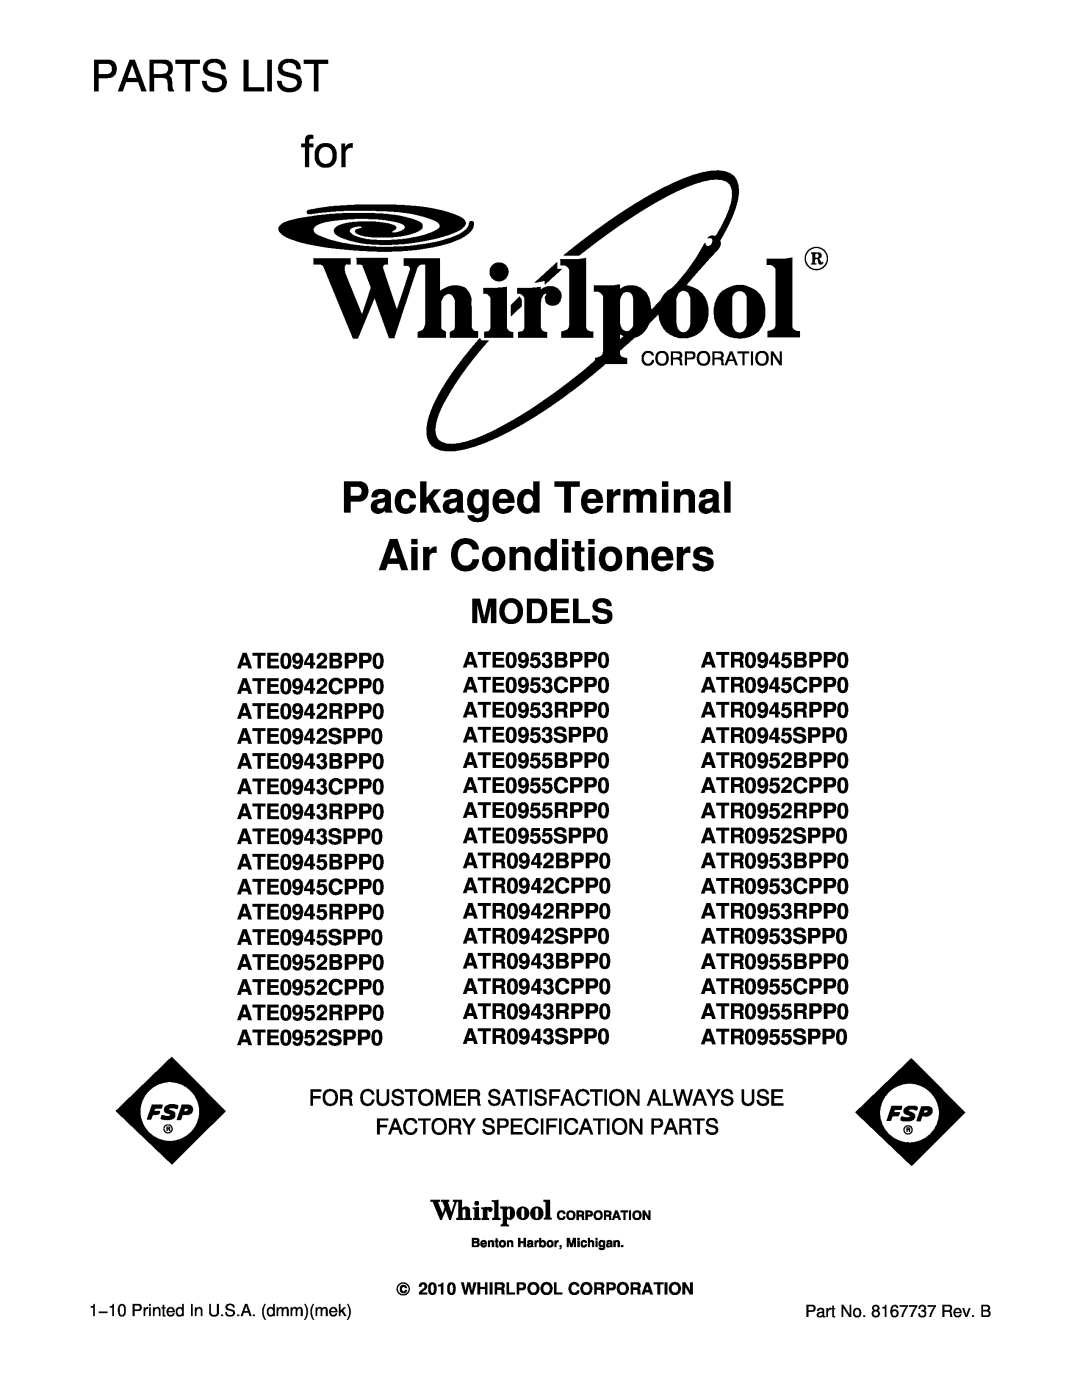 Whirlpool ATR0953SPP0, ATR0952RPP0, ATR0955BPP0, ATR0955SPP0, ATR0952SPP0 manual Packaged Terminal Air Conditioners, Models 